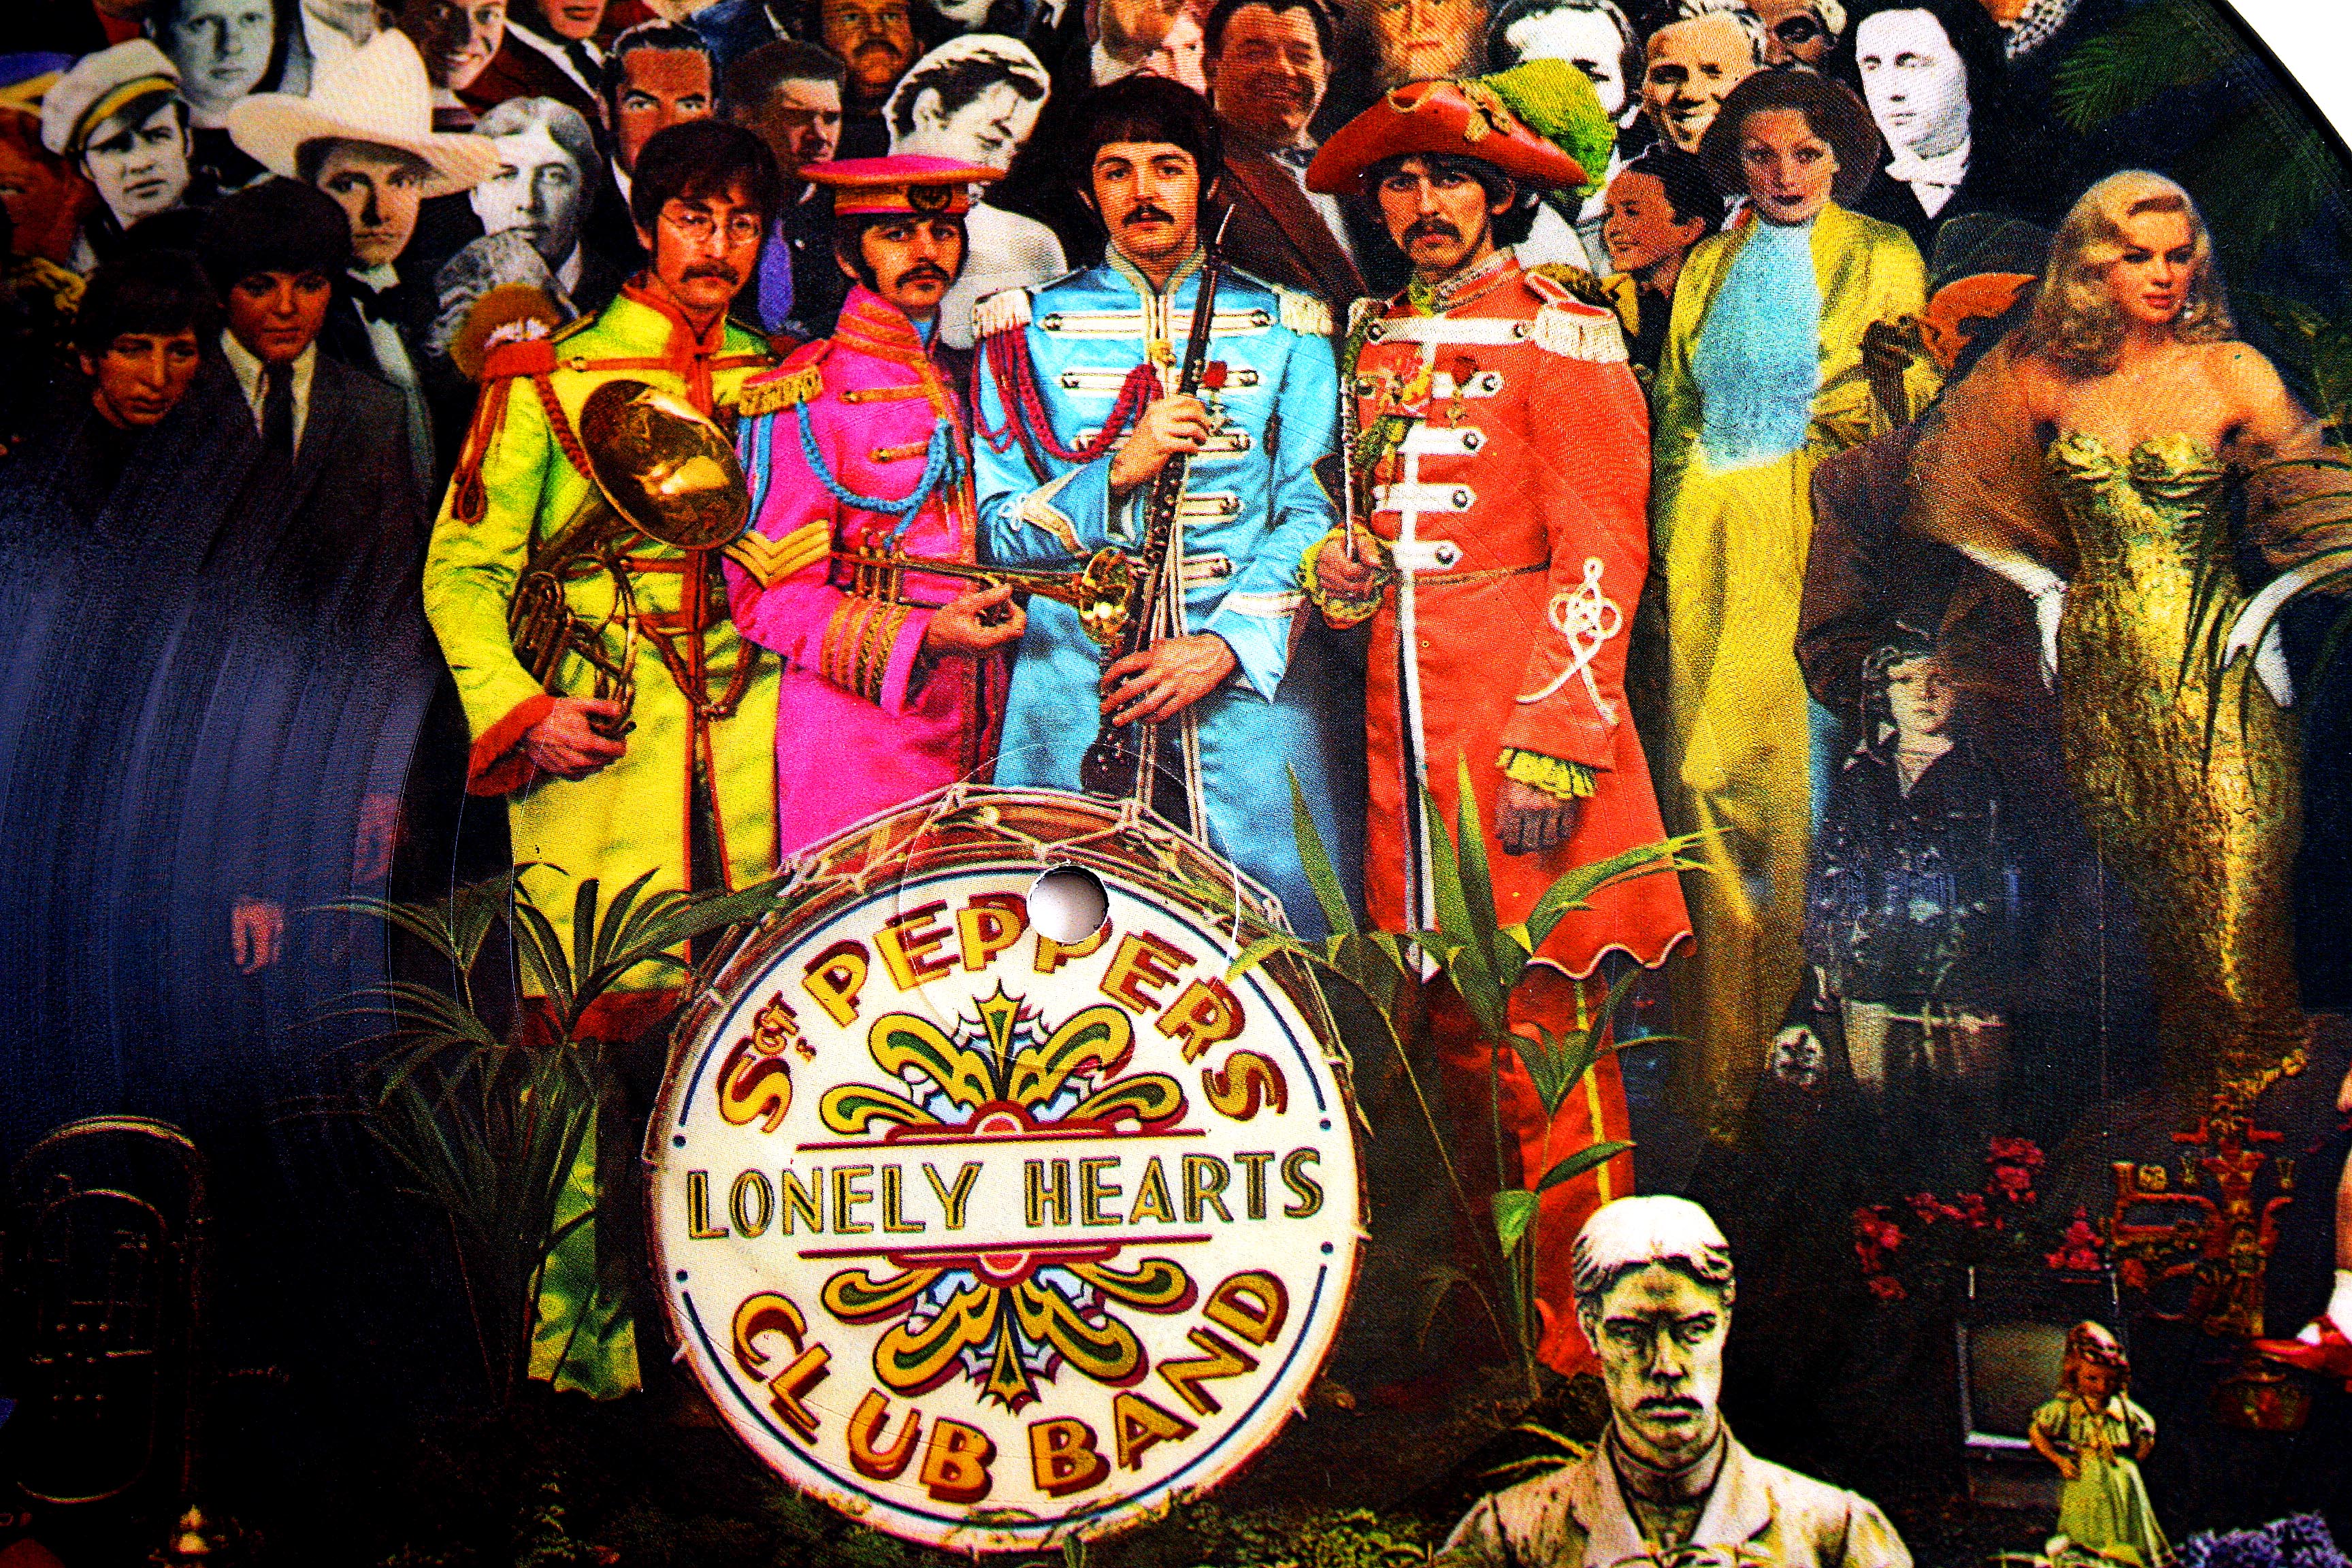 Sgt Peppers Wallpaper Images | Hot Sex Picture